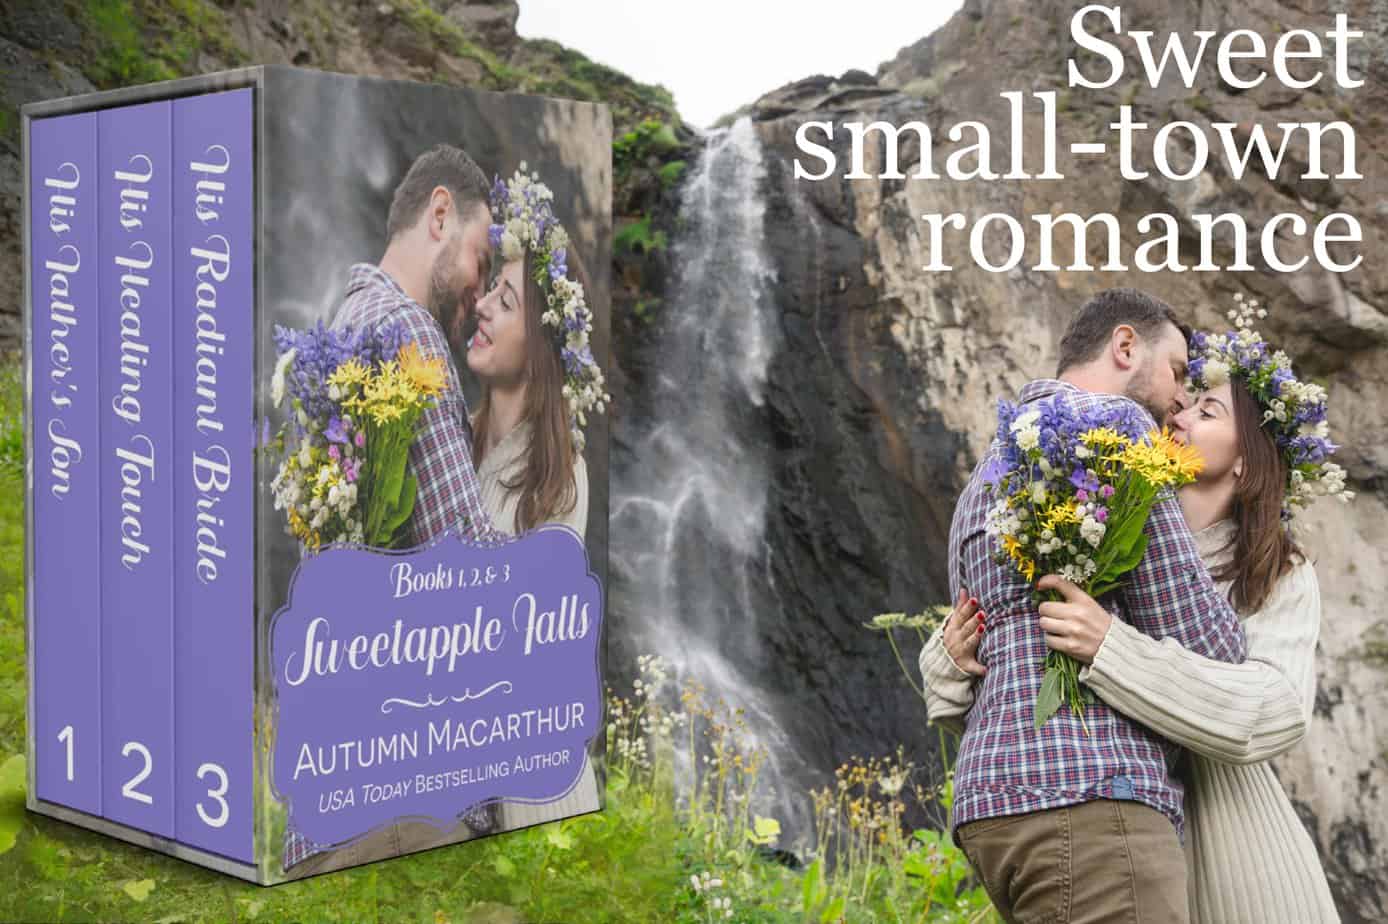 Image of a couple hugging beside a waterfall, cover for Sweetapple Falls Books 1-3, an ebook collection of three sweet small-town Christian romances by Autumn Macarthur